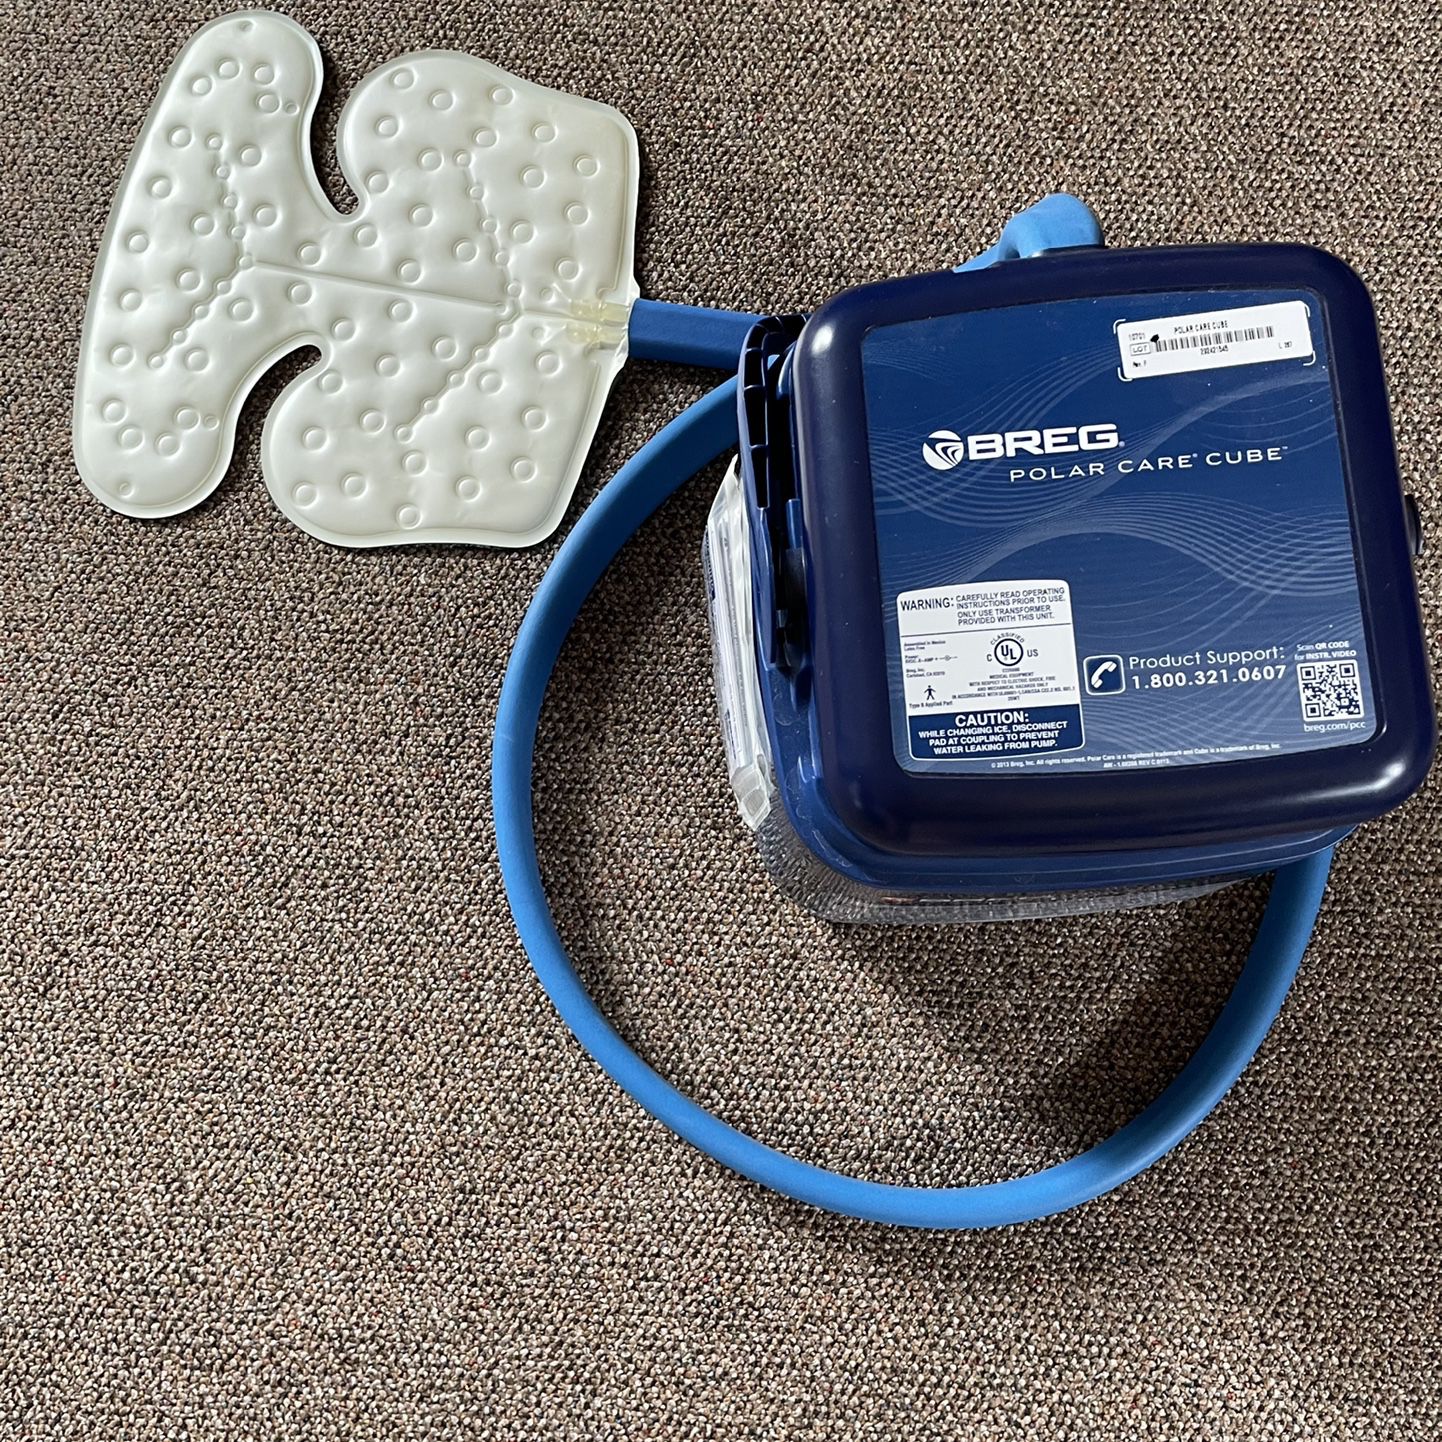 Polar Cube Ice Therapy System